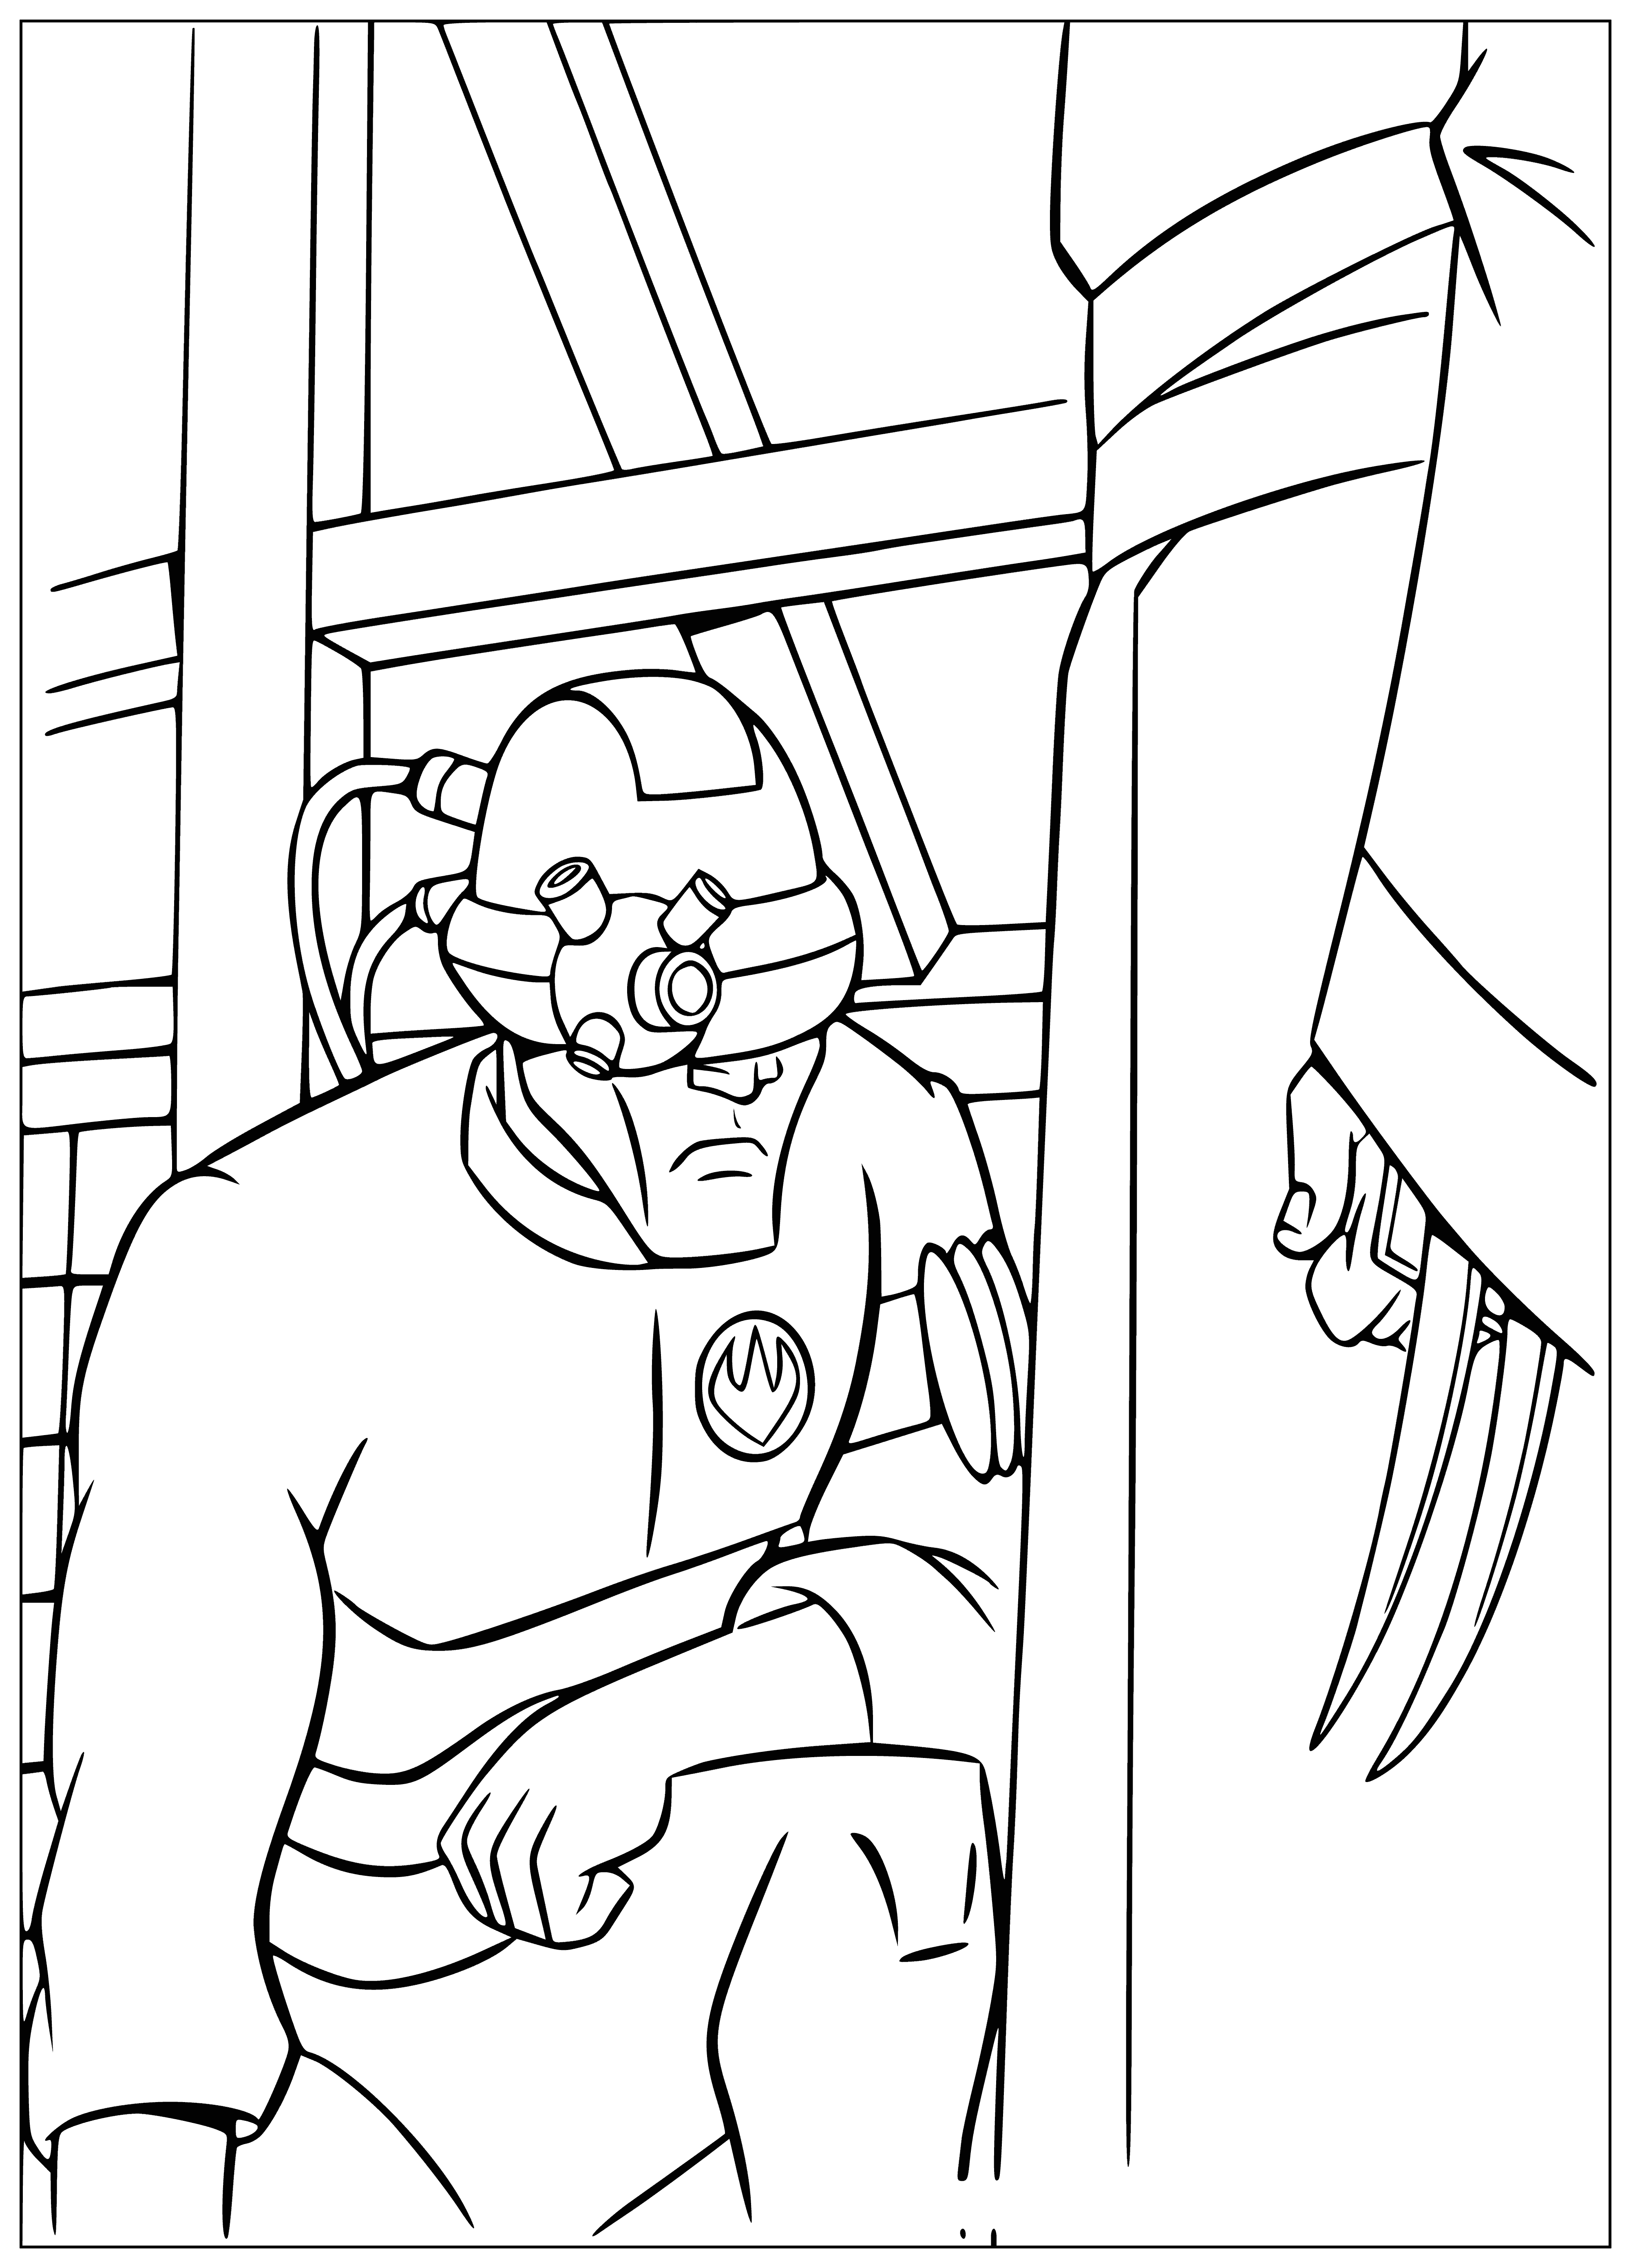 coloring page: Teenage Mutant Ninja Turtles are cyborgs w/metal parts and swords facing a Foot Soldier. One wears blue and the other red bandanas.